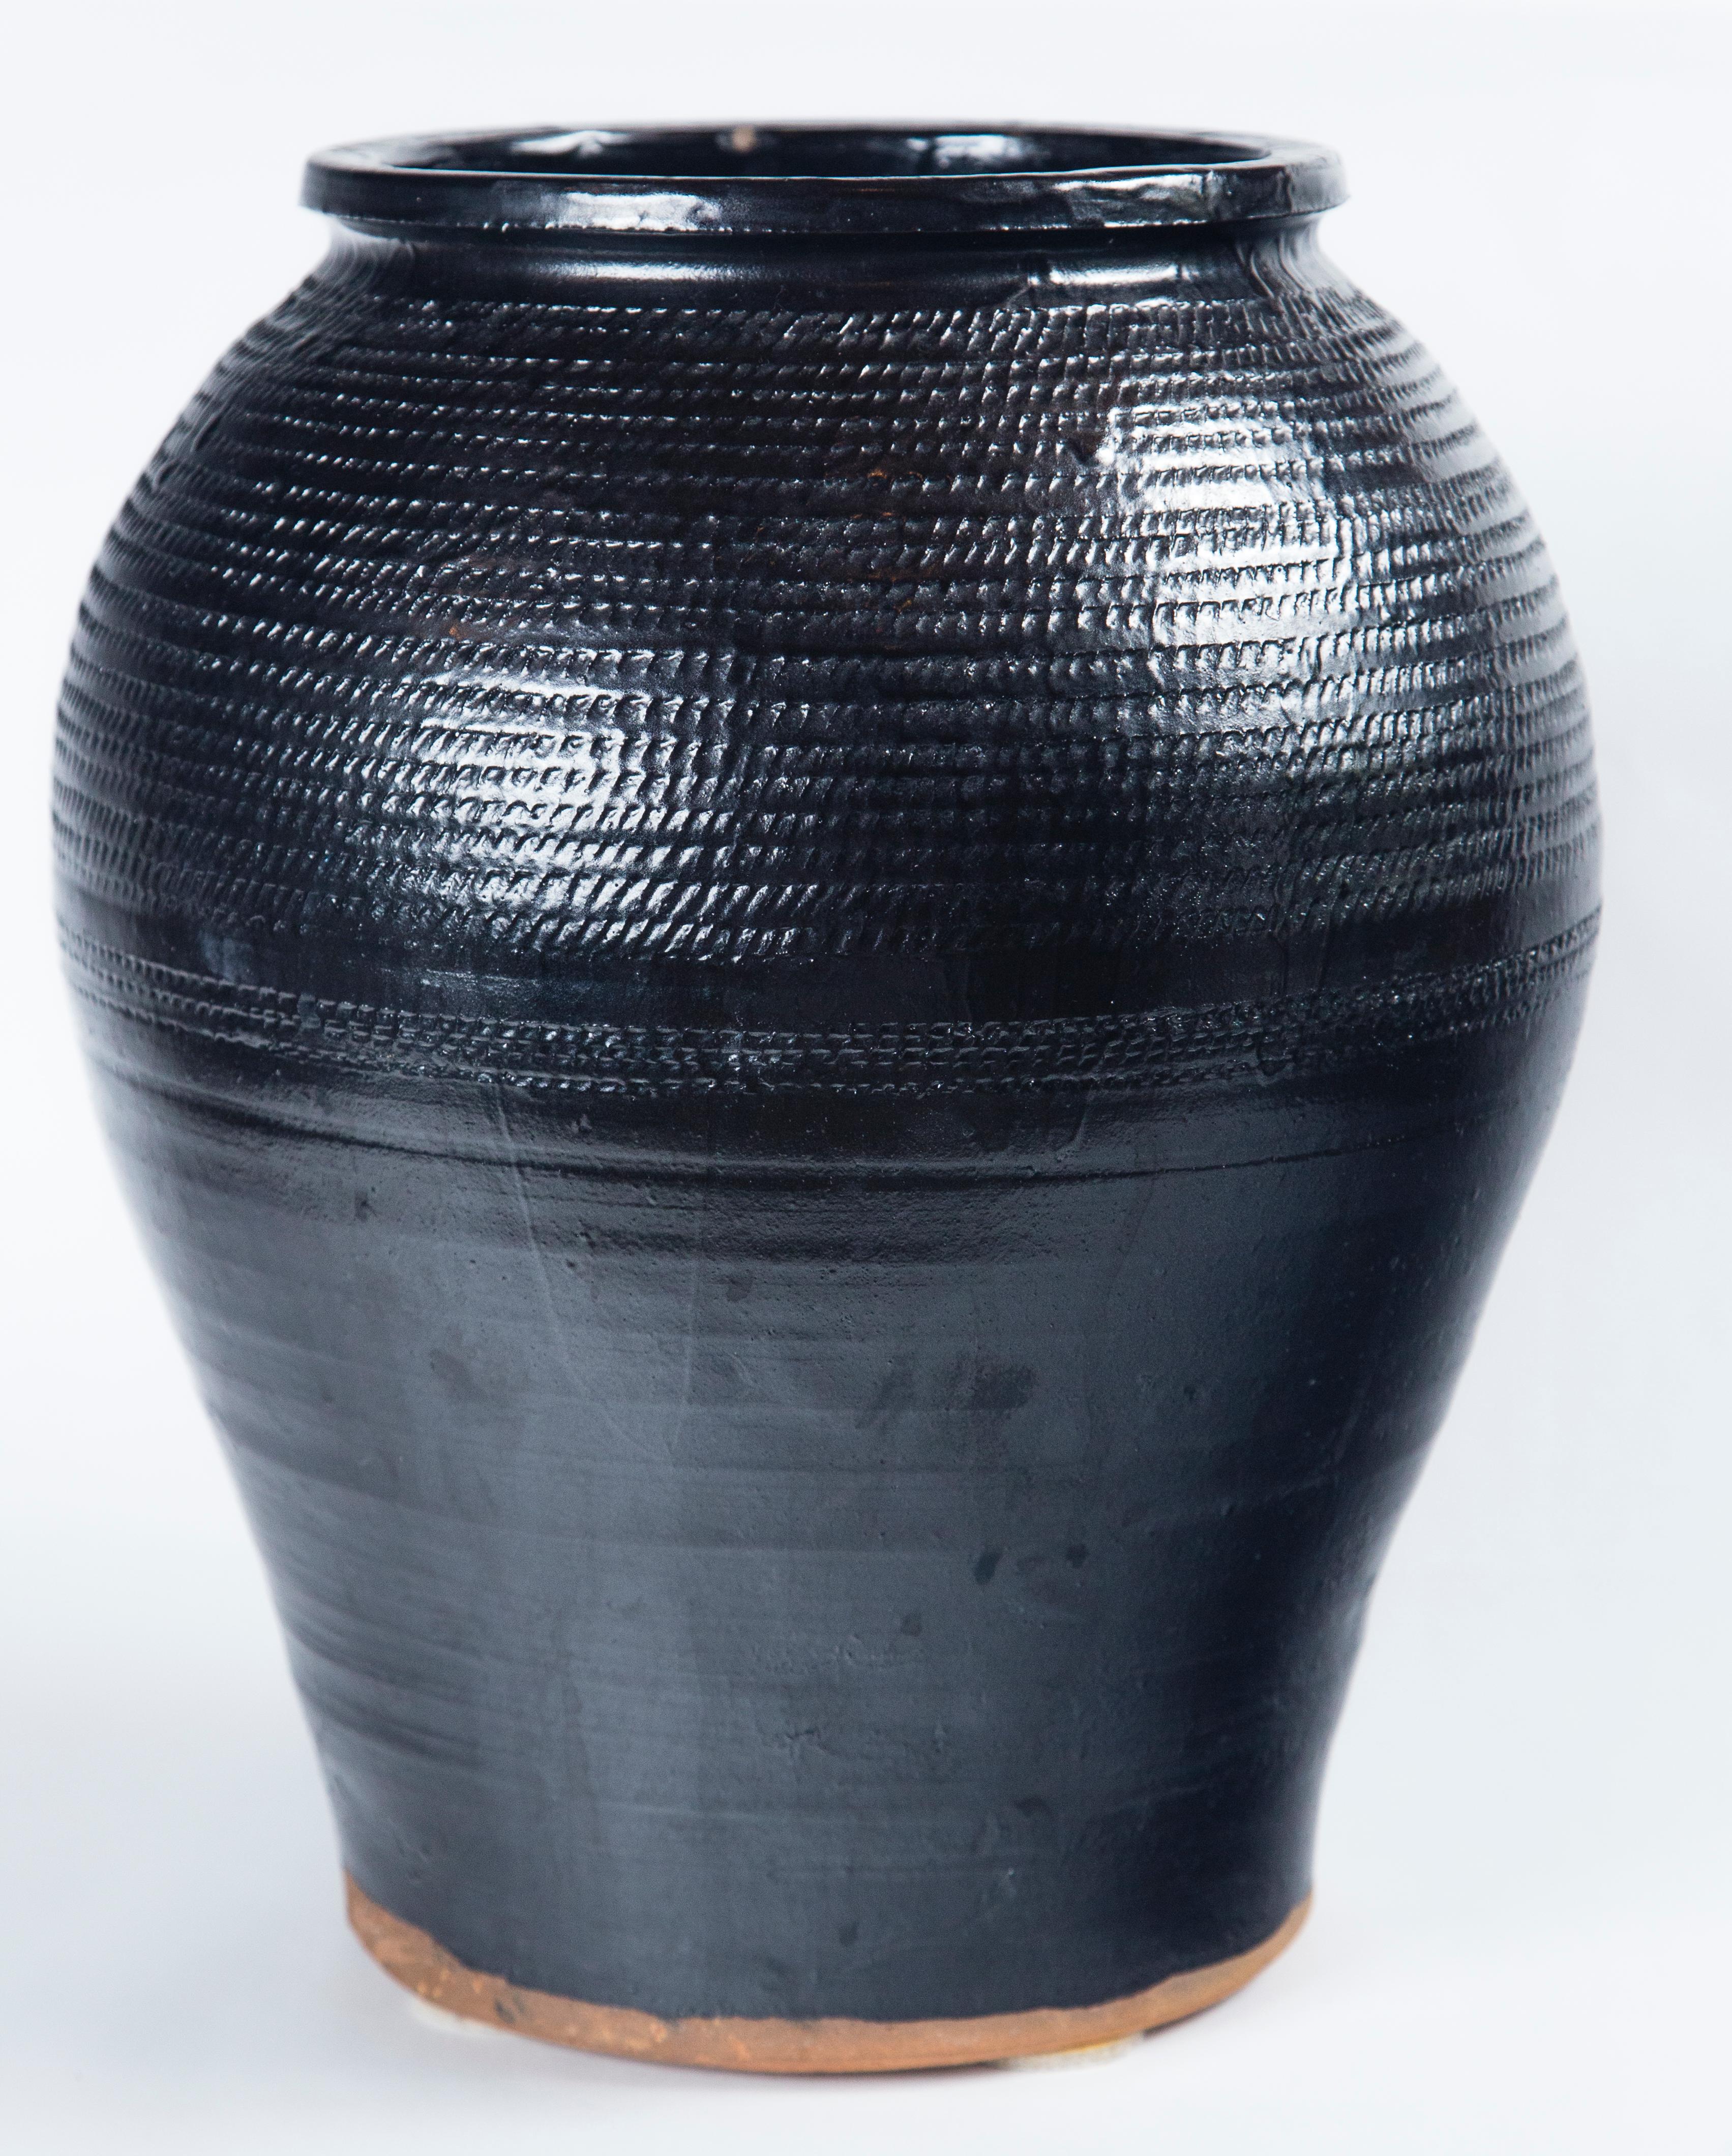 Asian black glaze ceramic storage jar, 20th century. Large size container with overall incised design.